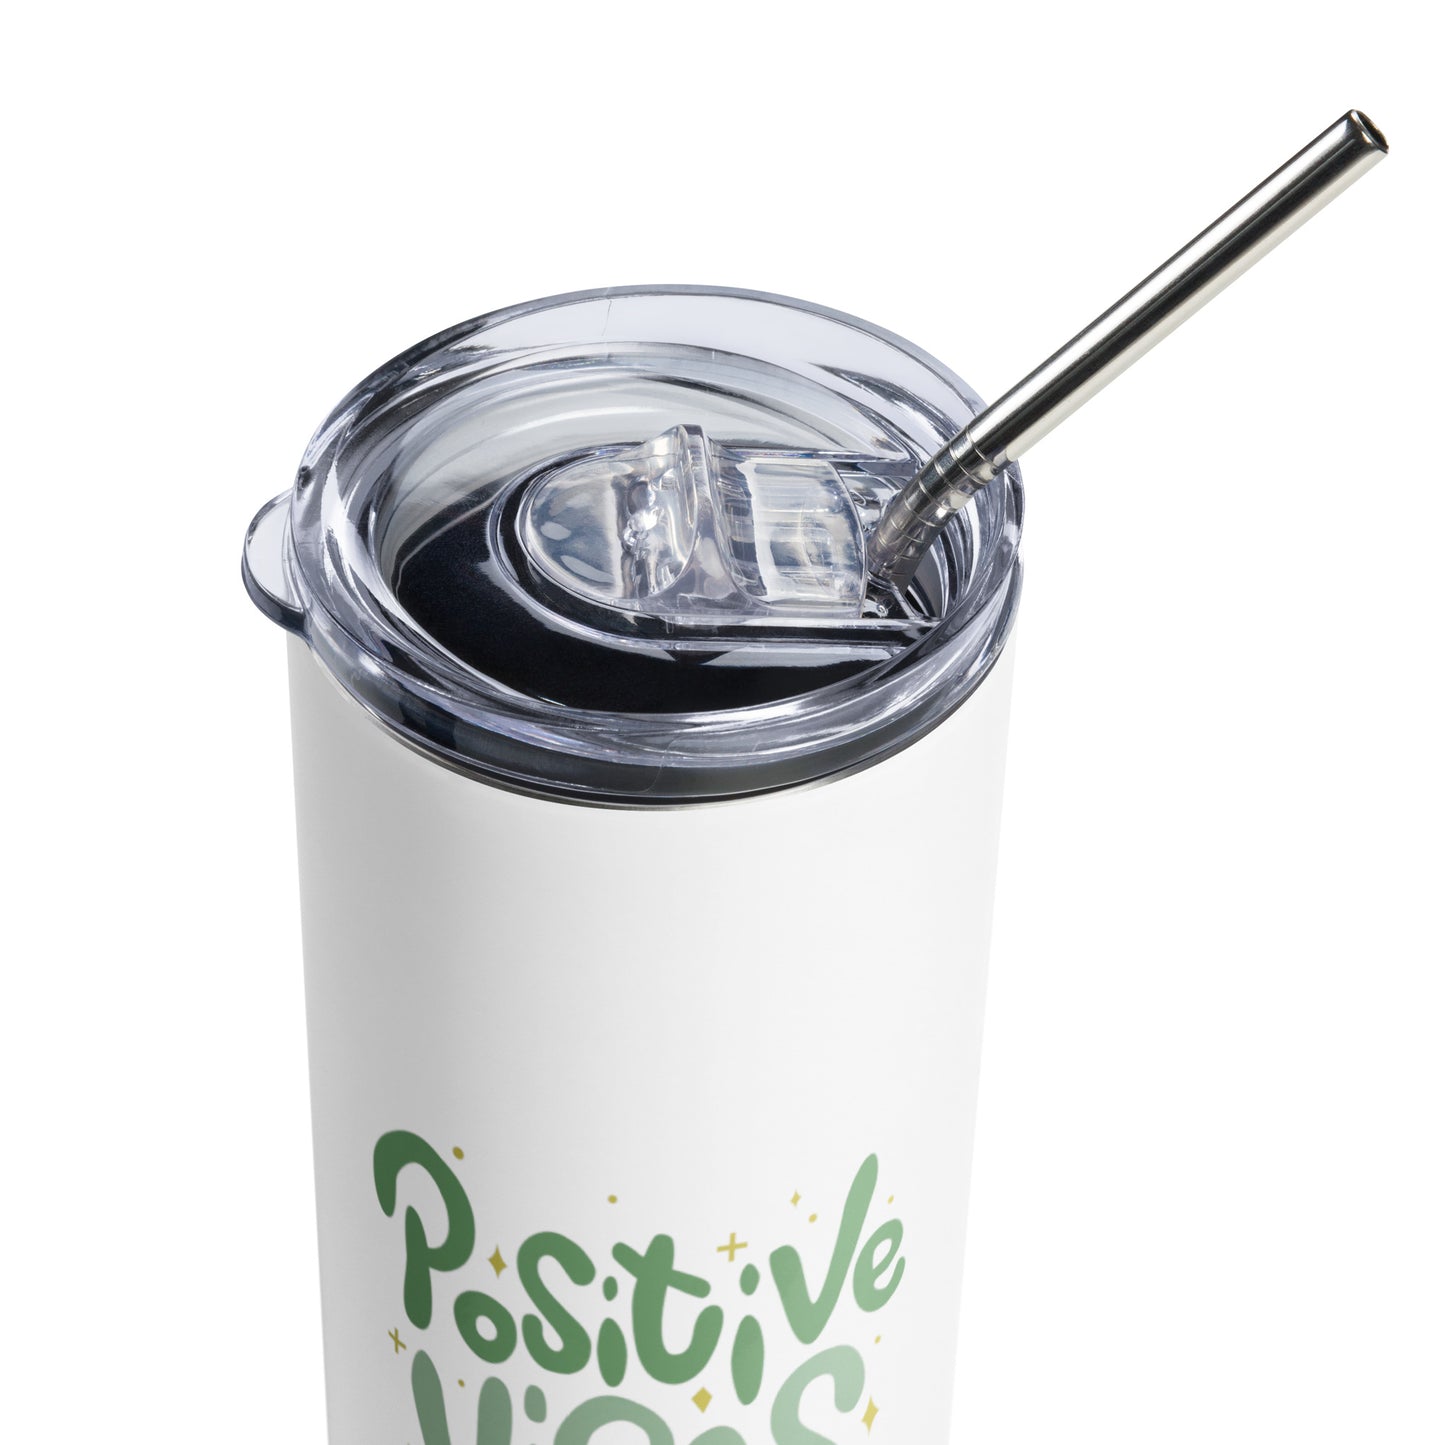 Positive Vibes - Stainless steel tumbler